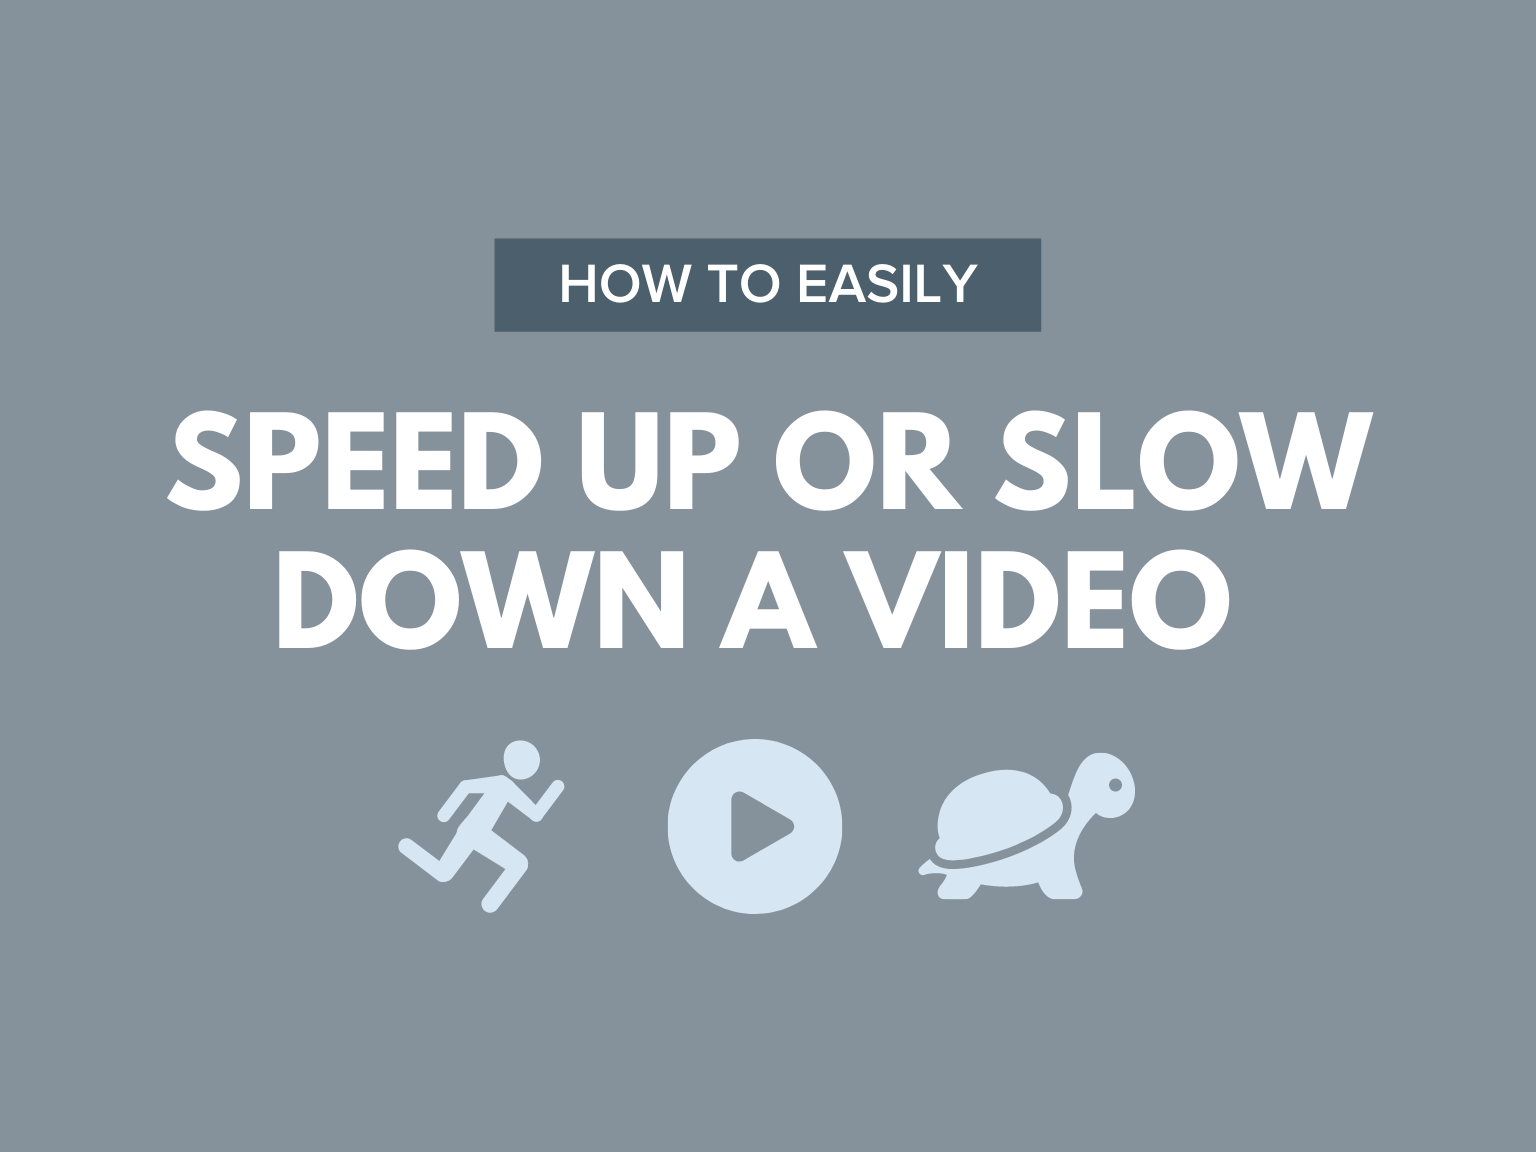 best slow motion video player for mac free